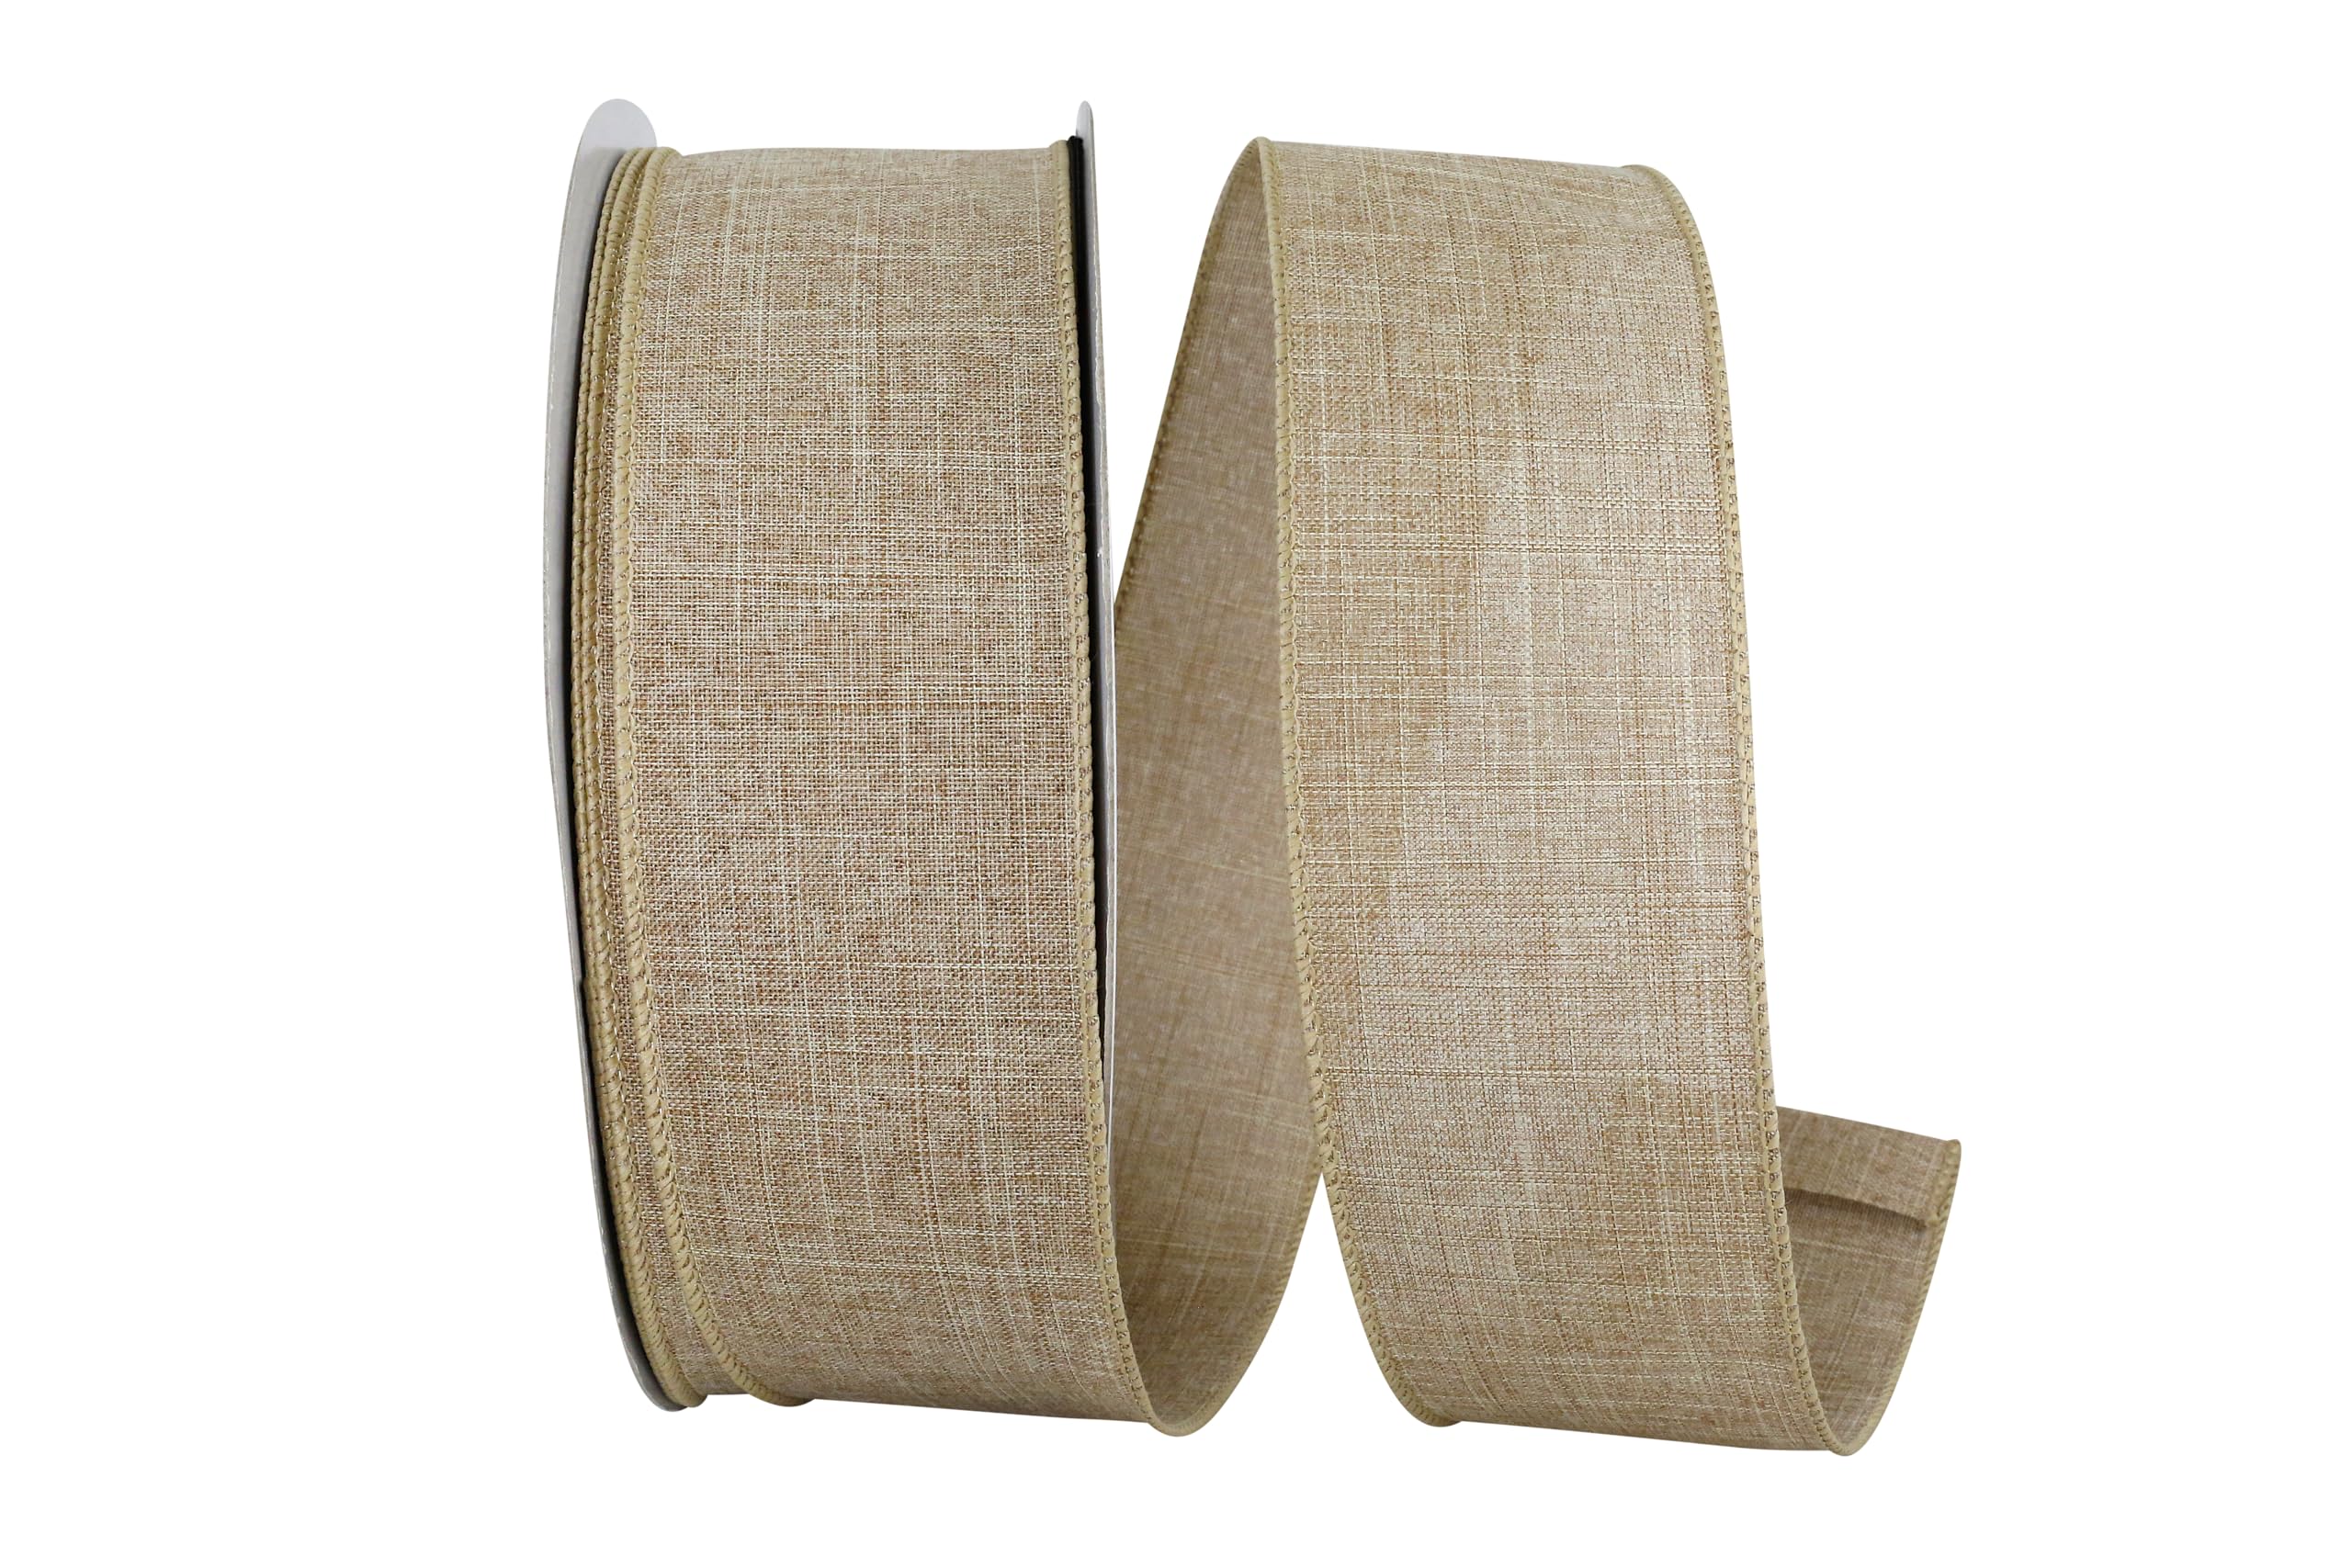 Reliant Ribbon 92573W-750-40K Everyday Linen Value Wired Edge Ribbon, 2-1/2 Inch X 50 Yards, Natural